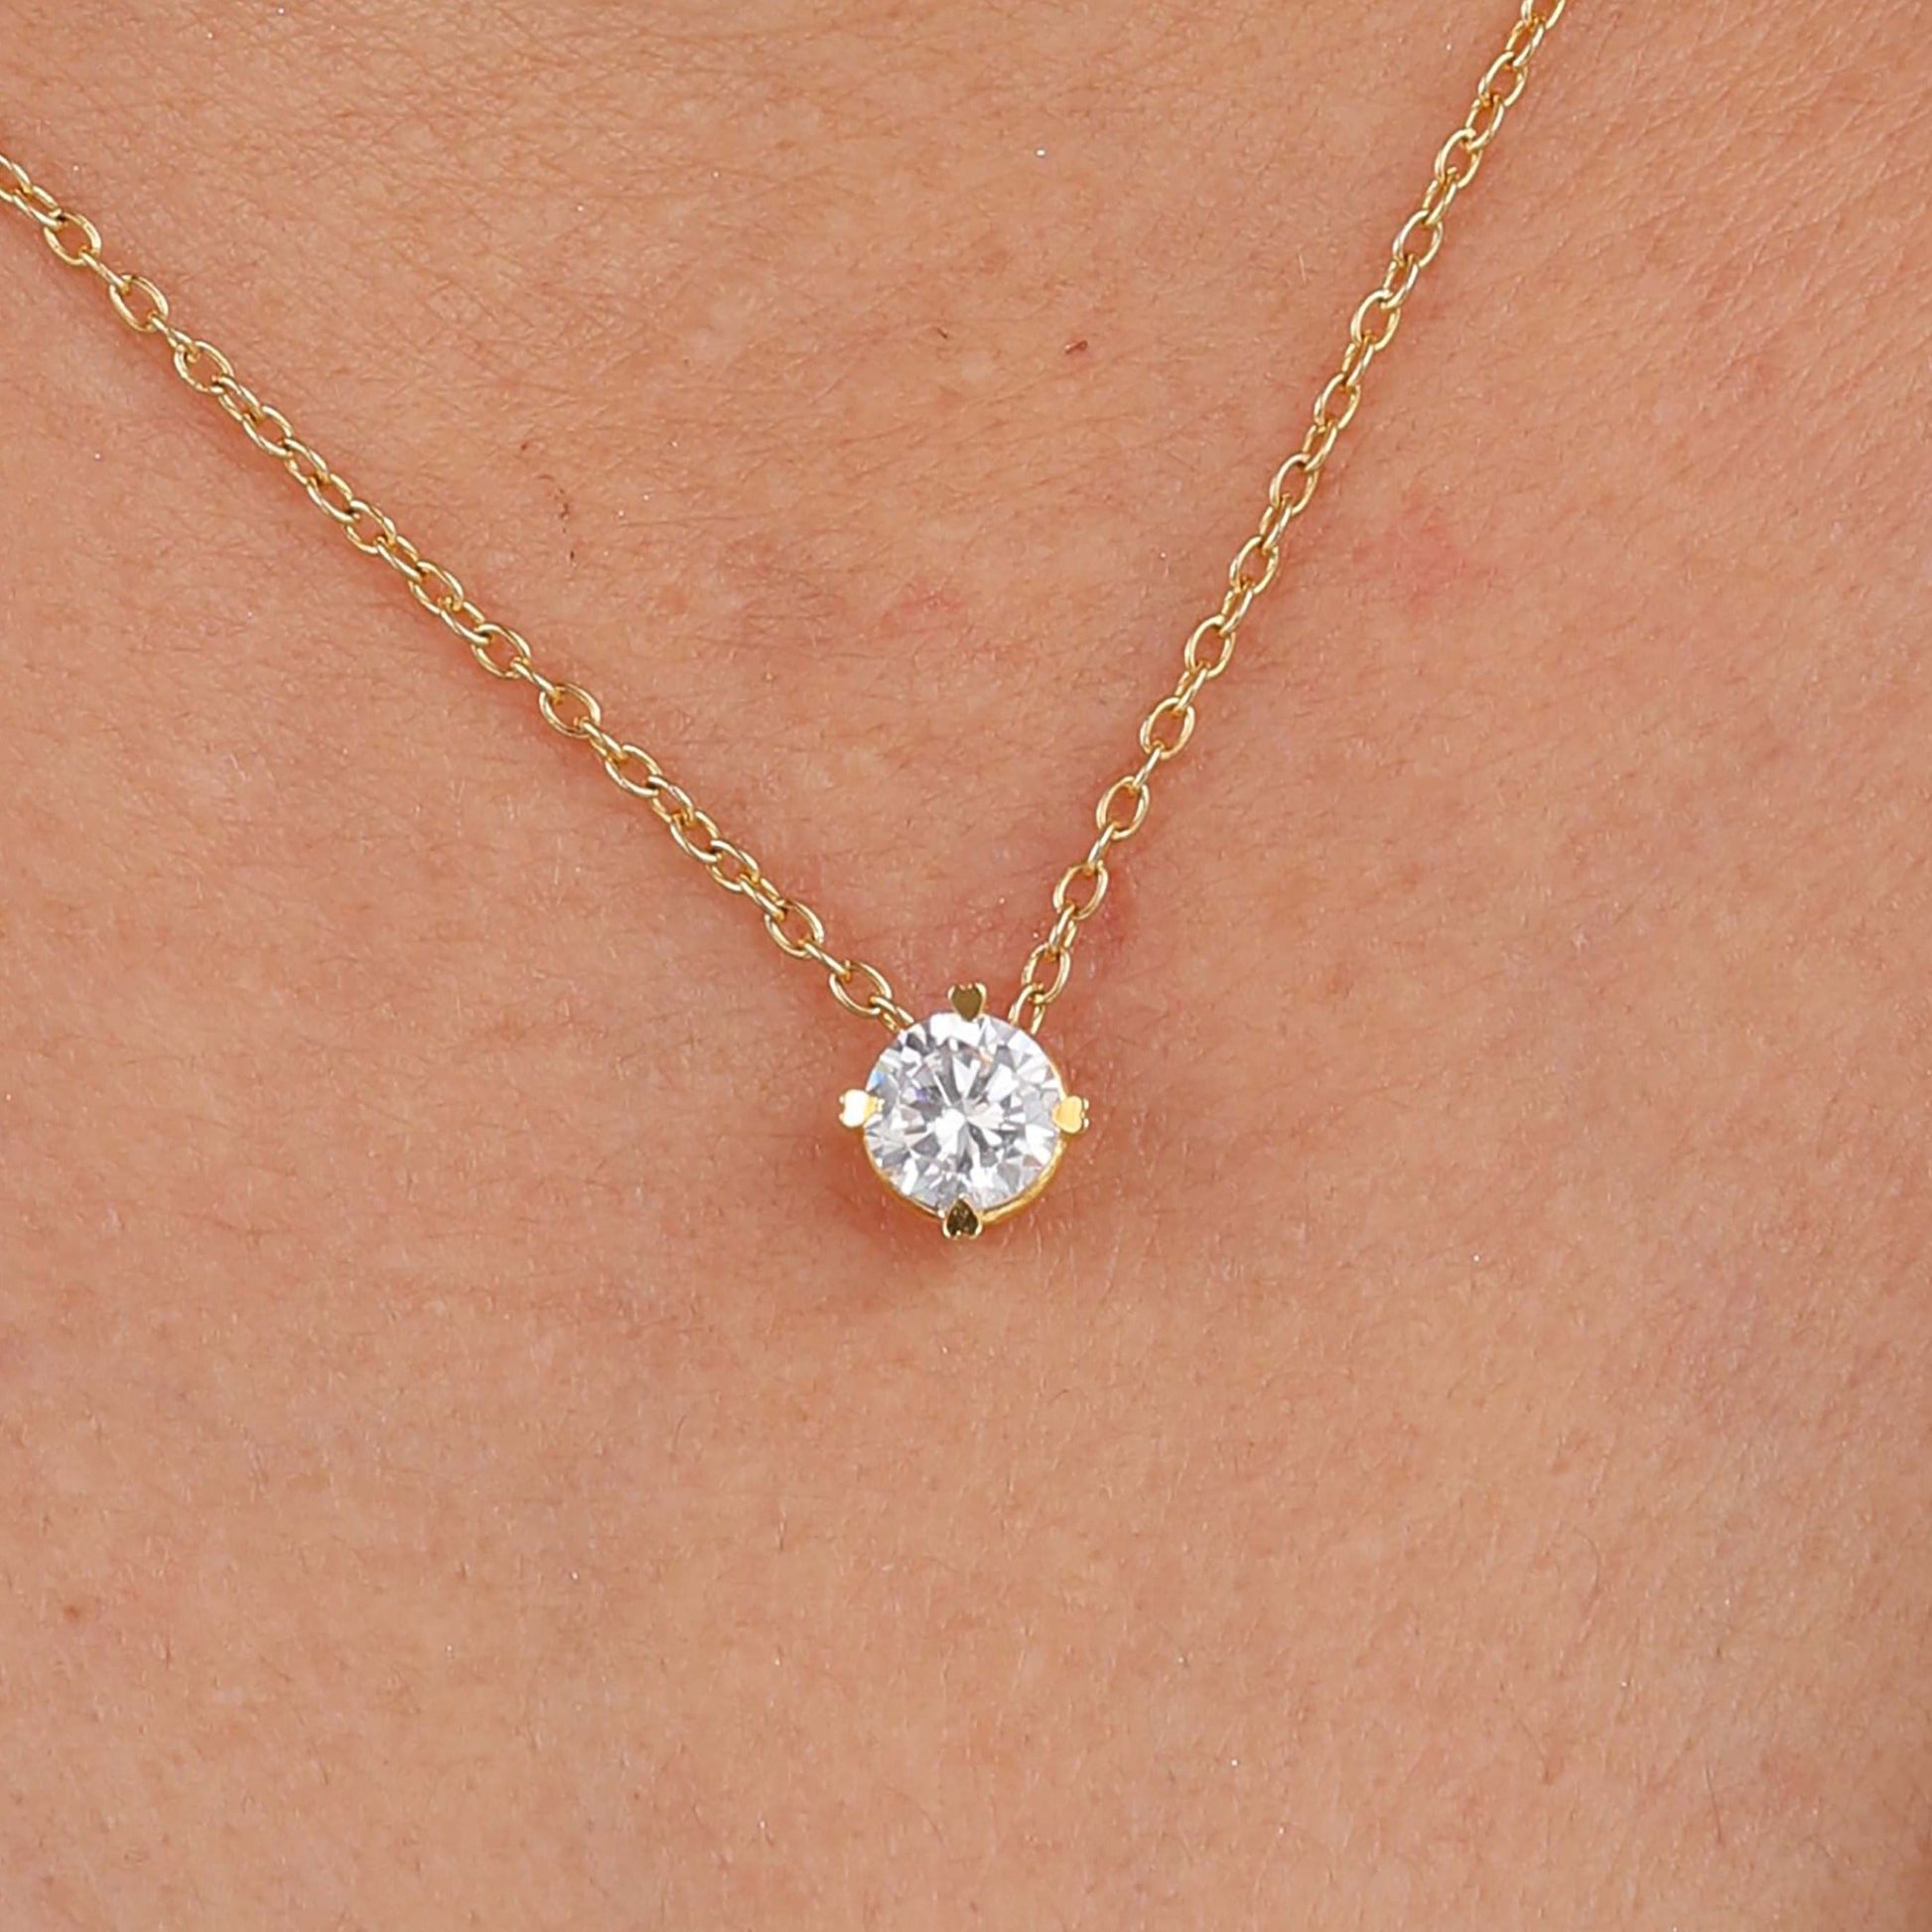 4 prong solitaire necklace